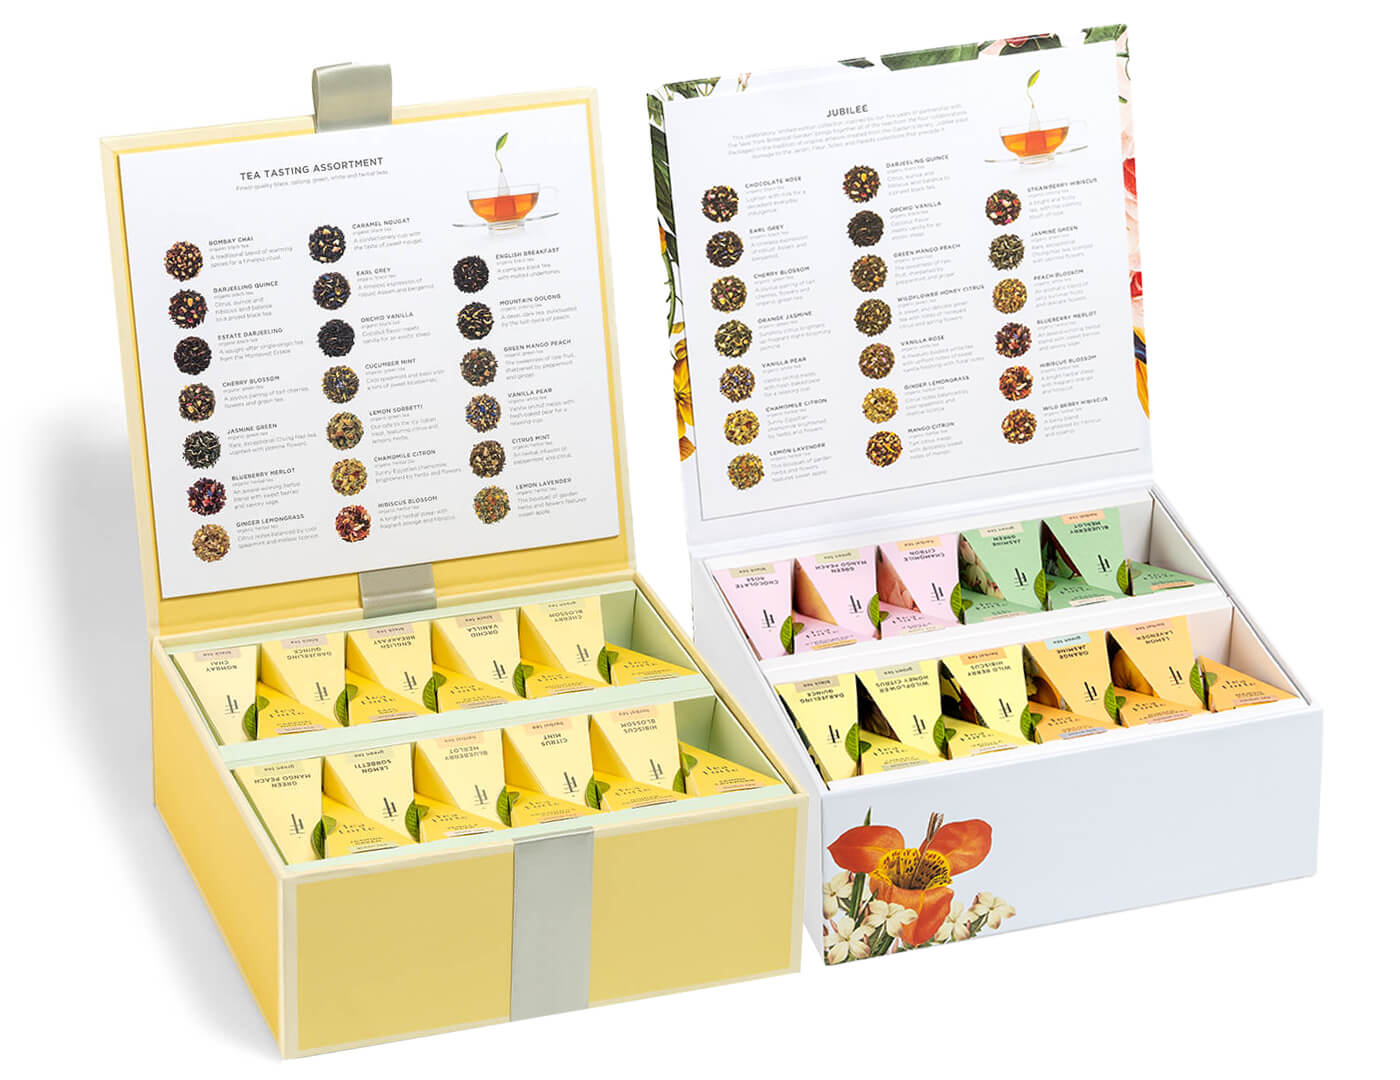 Classic & Jubilee Tea Chest Combo, 2 Tea Chests of 40 pyramid tea infusers each